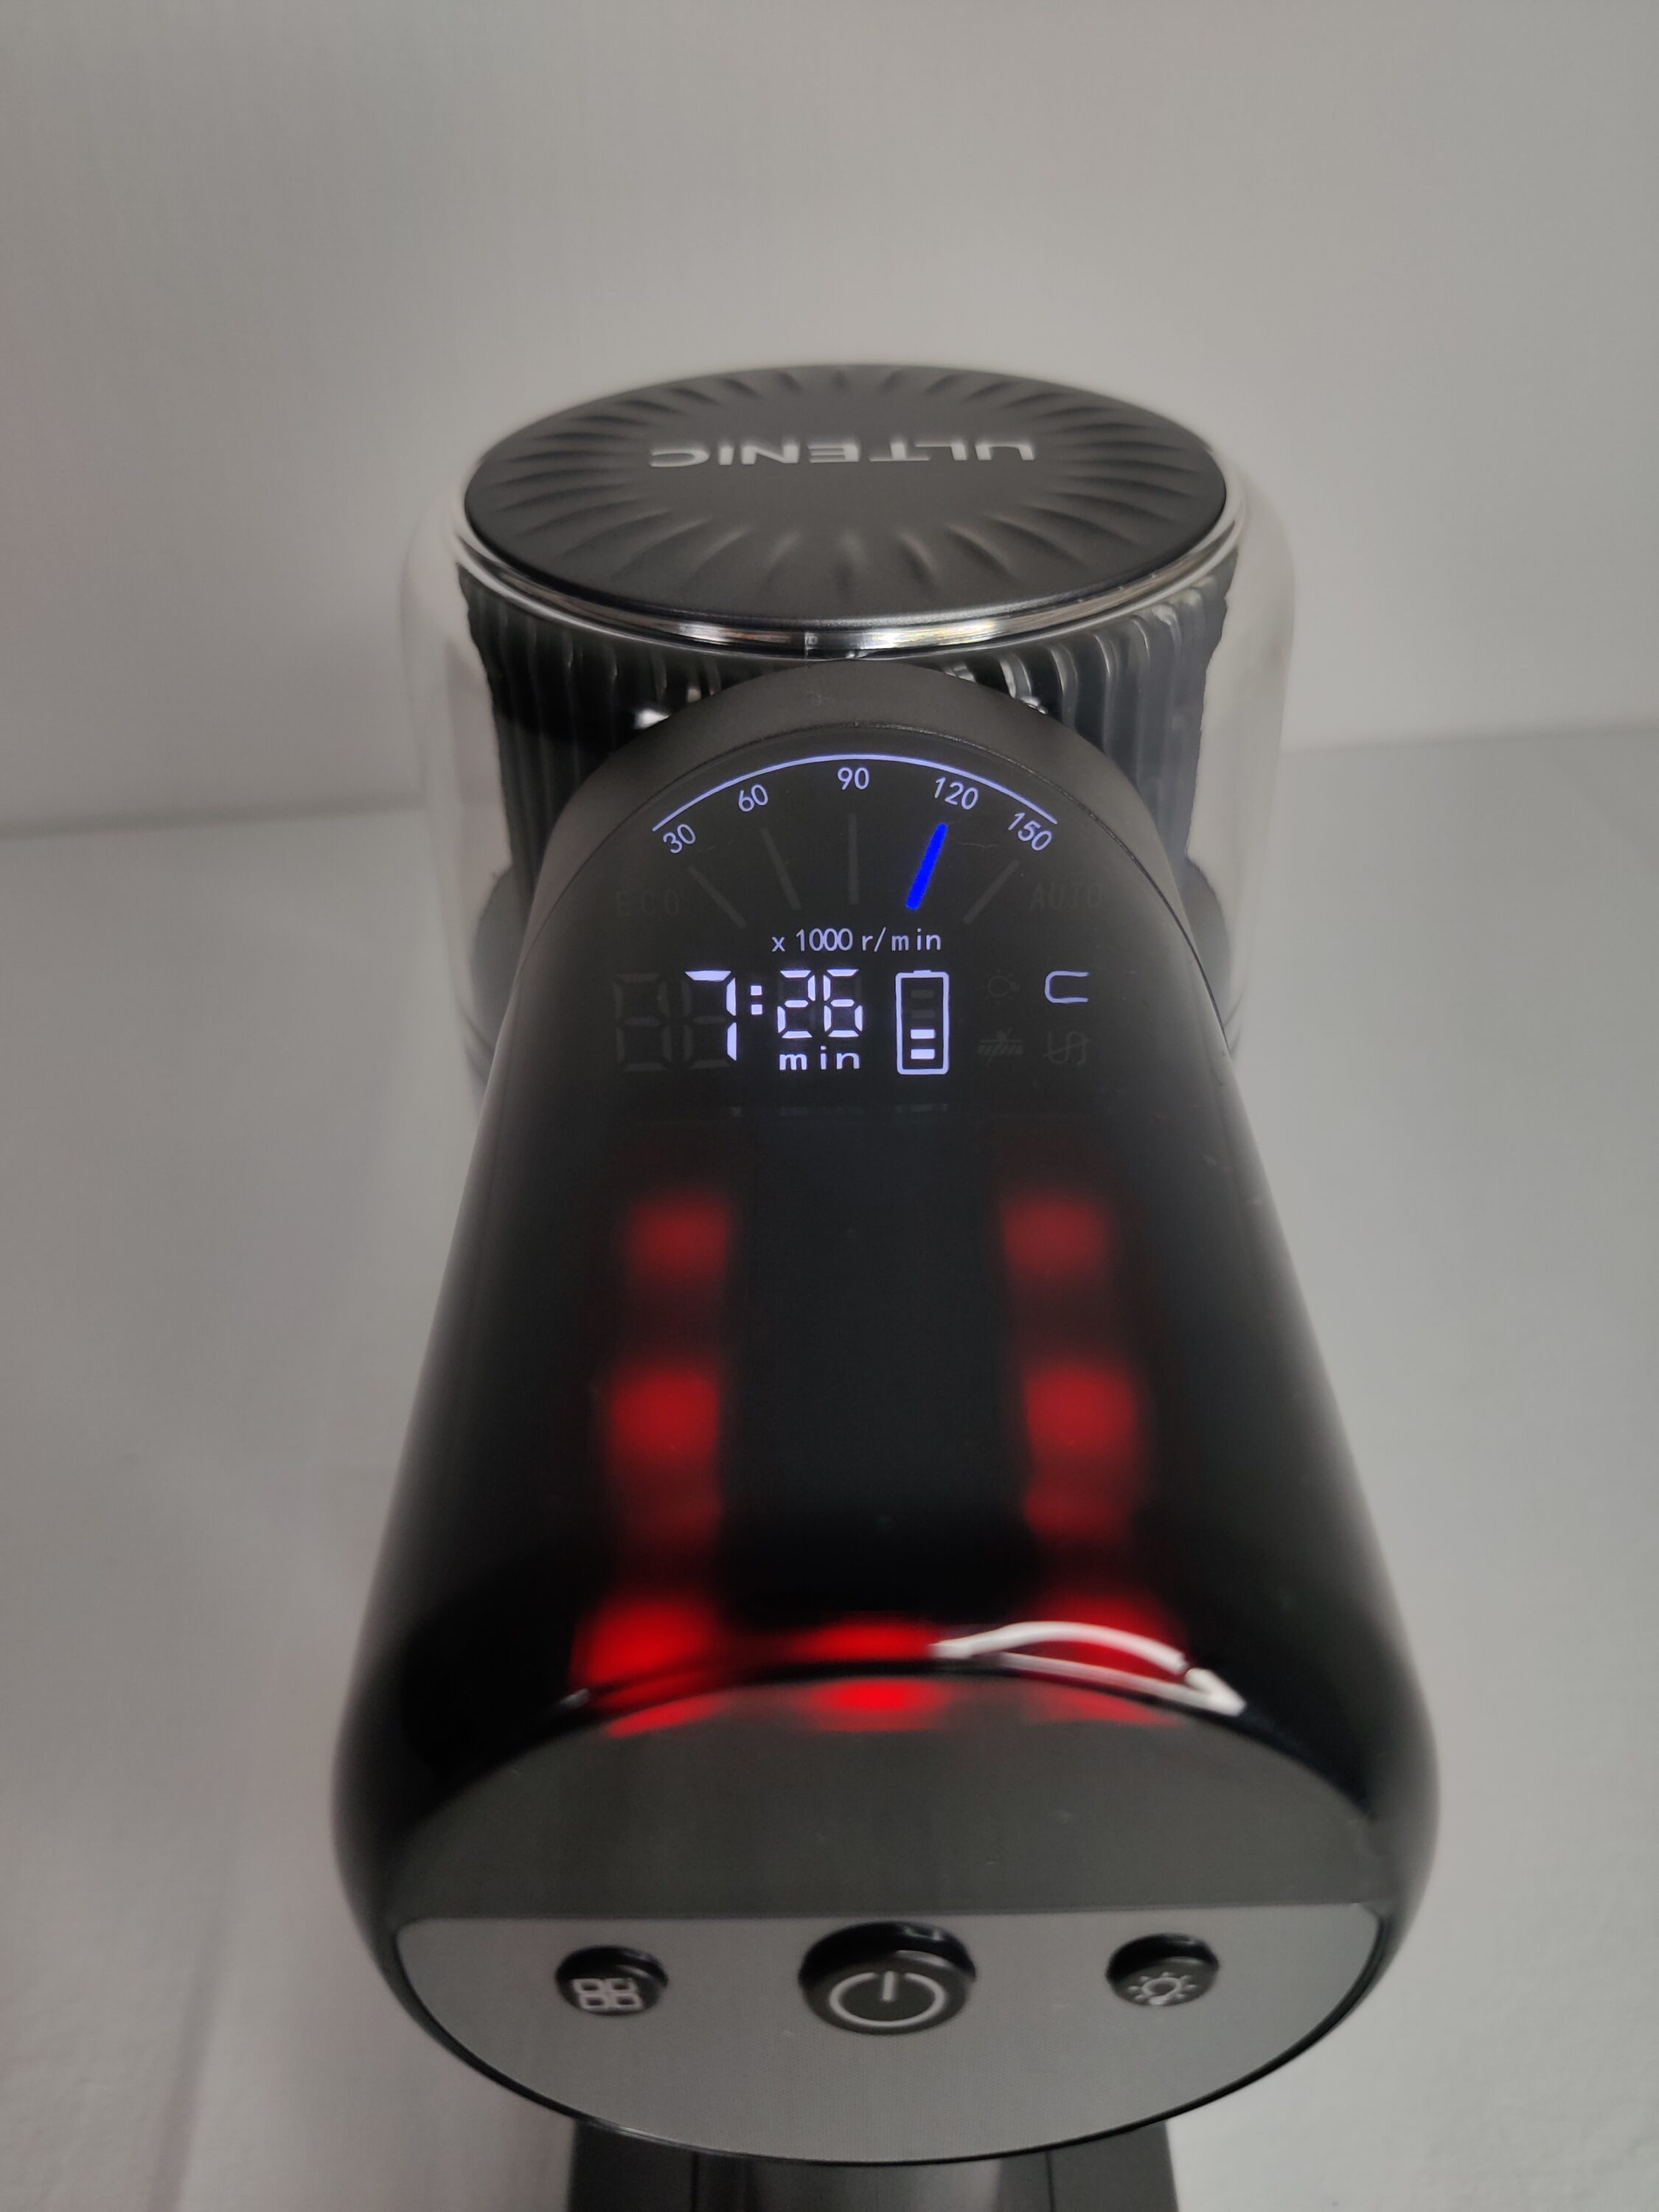 Unboxing and Showcasing the Ultenic U12 Vesla: A Complete Review